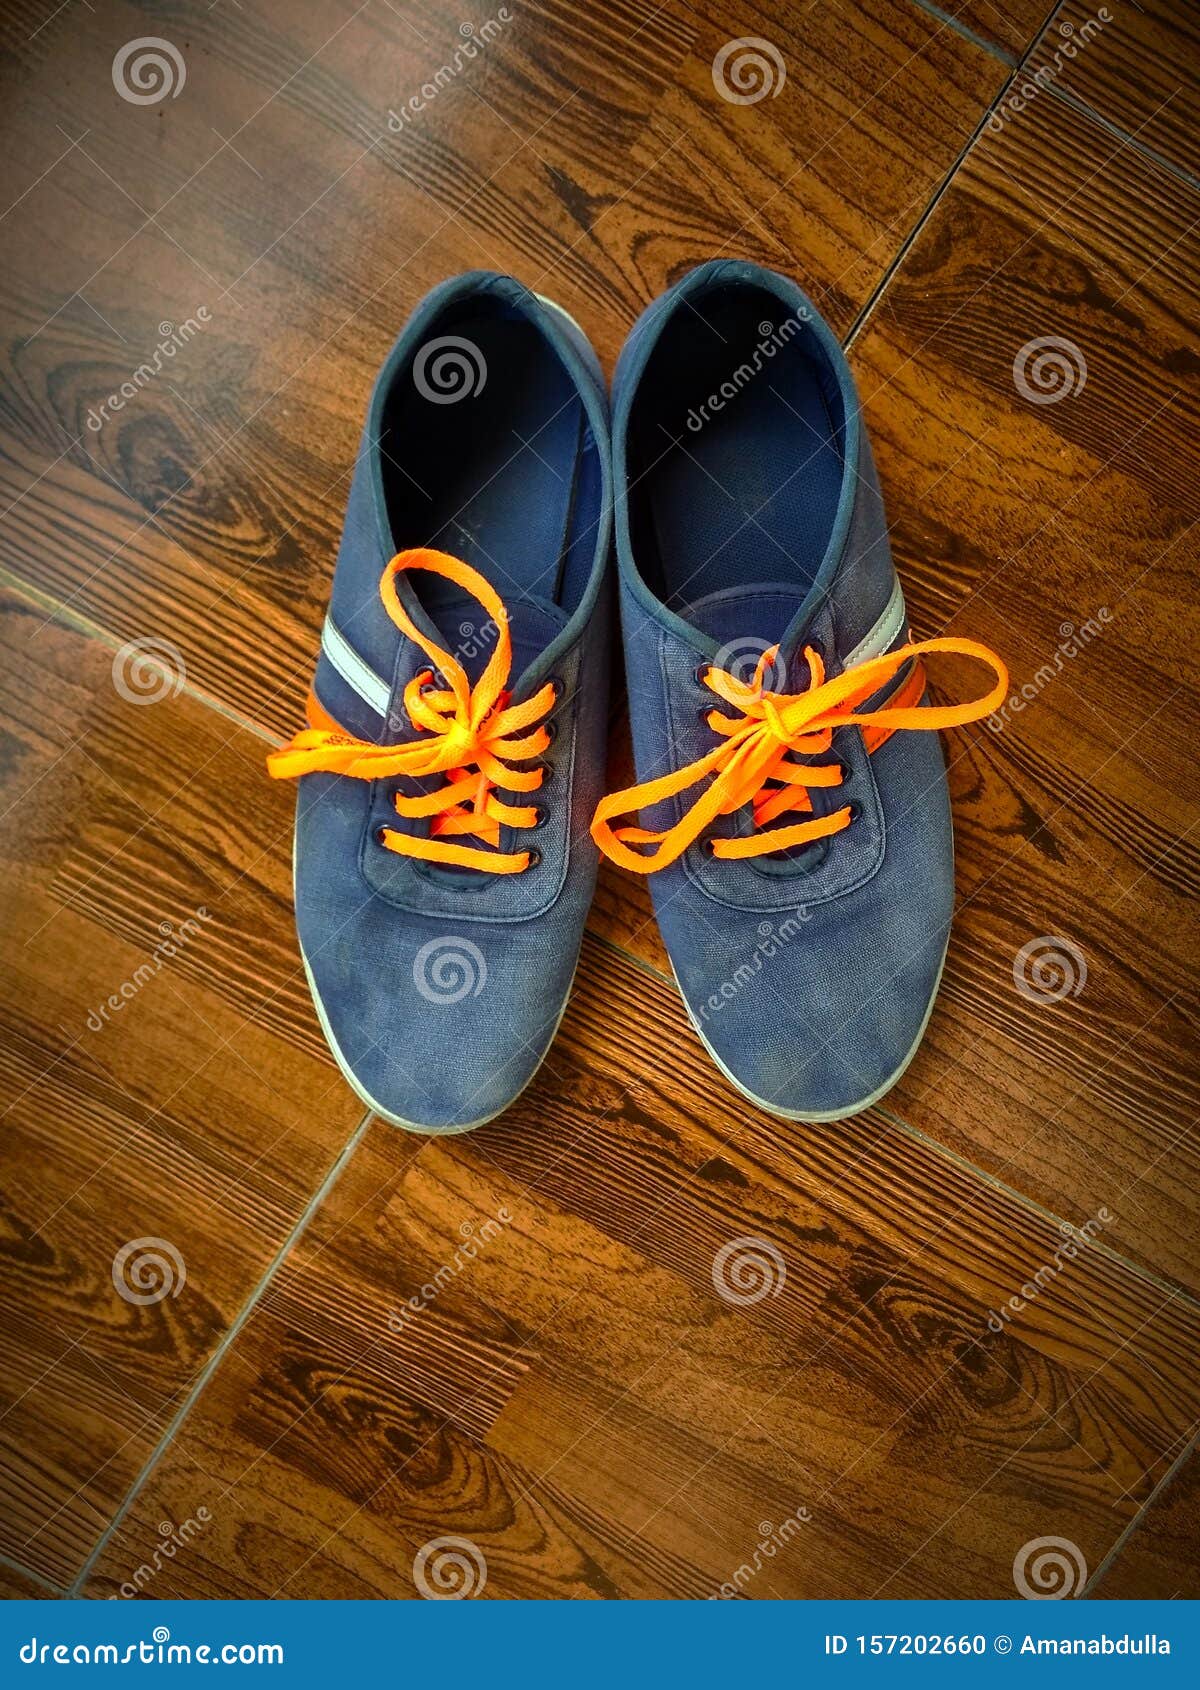 blue and orange sneakers